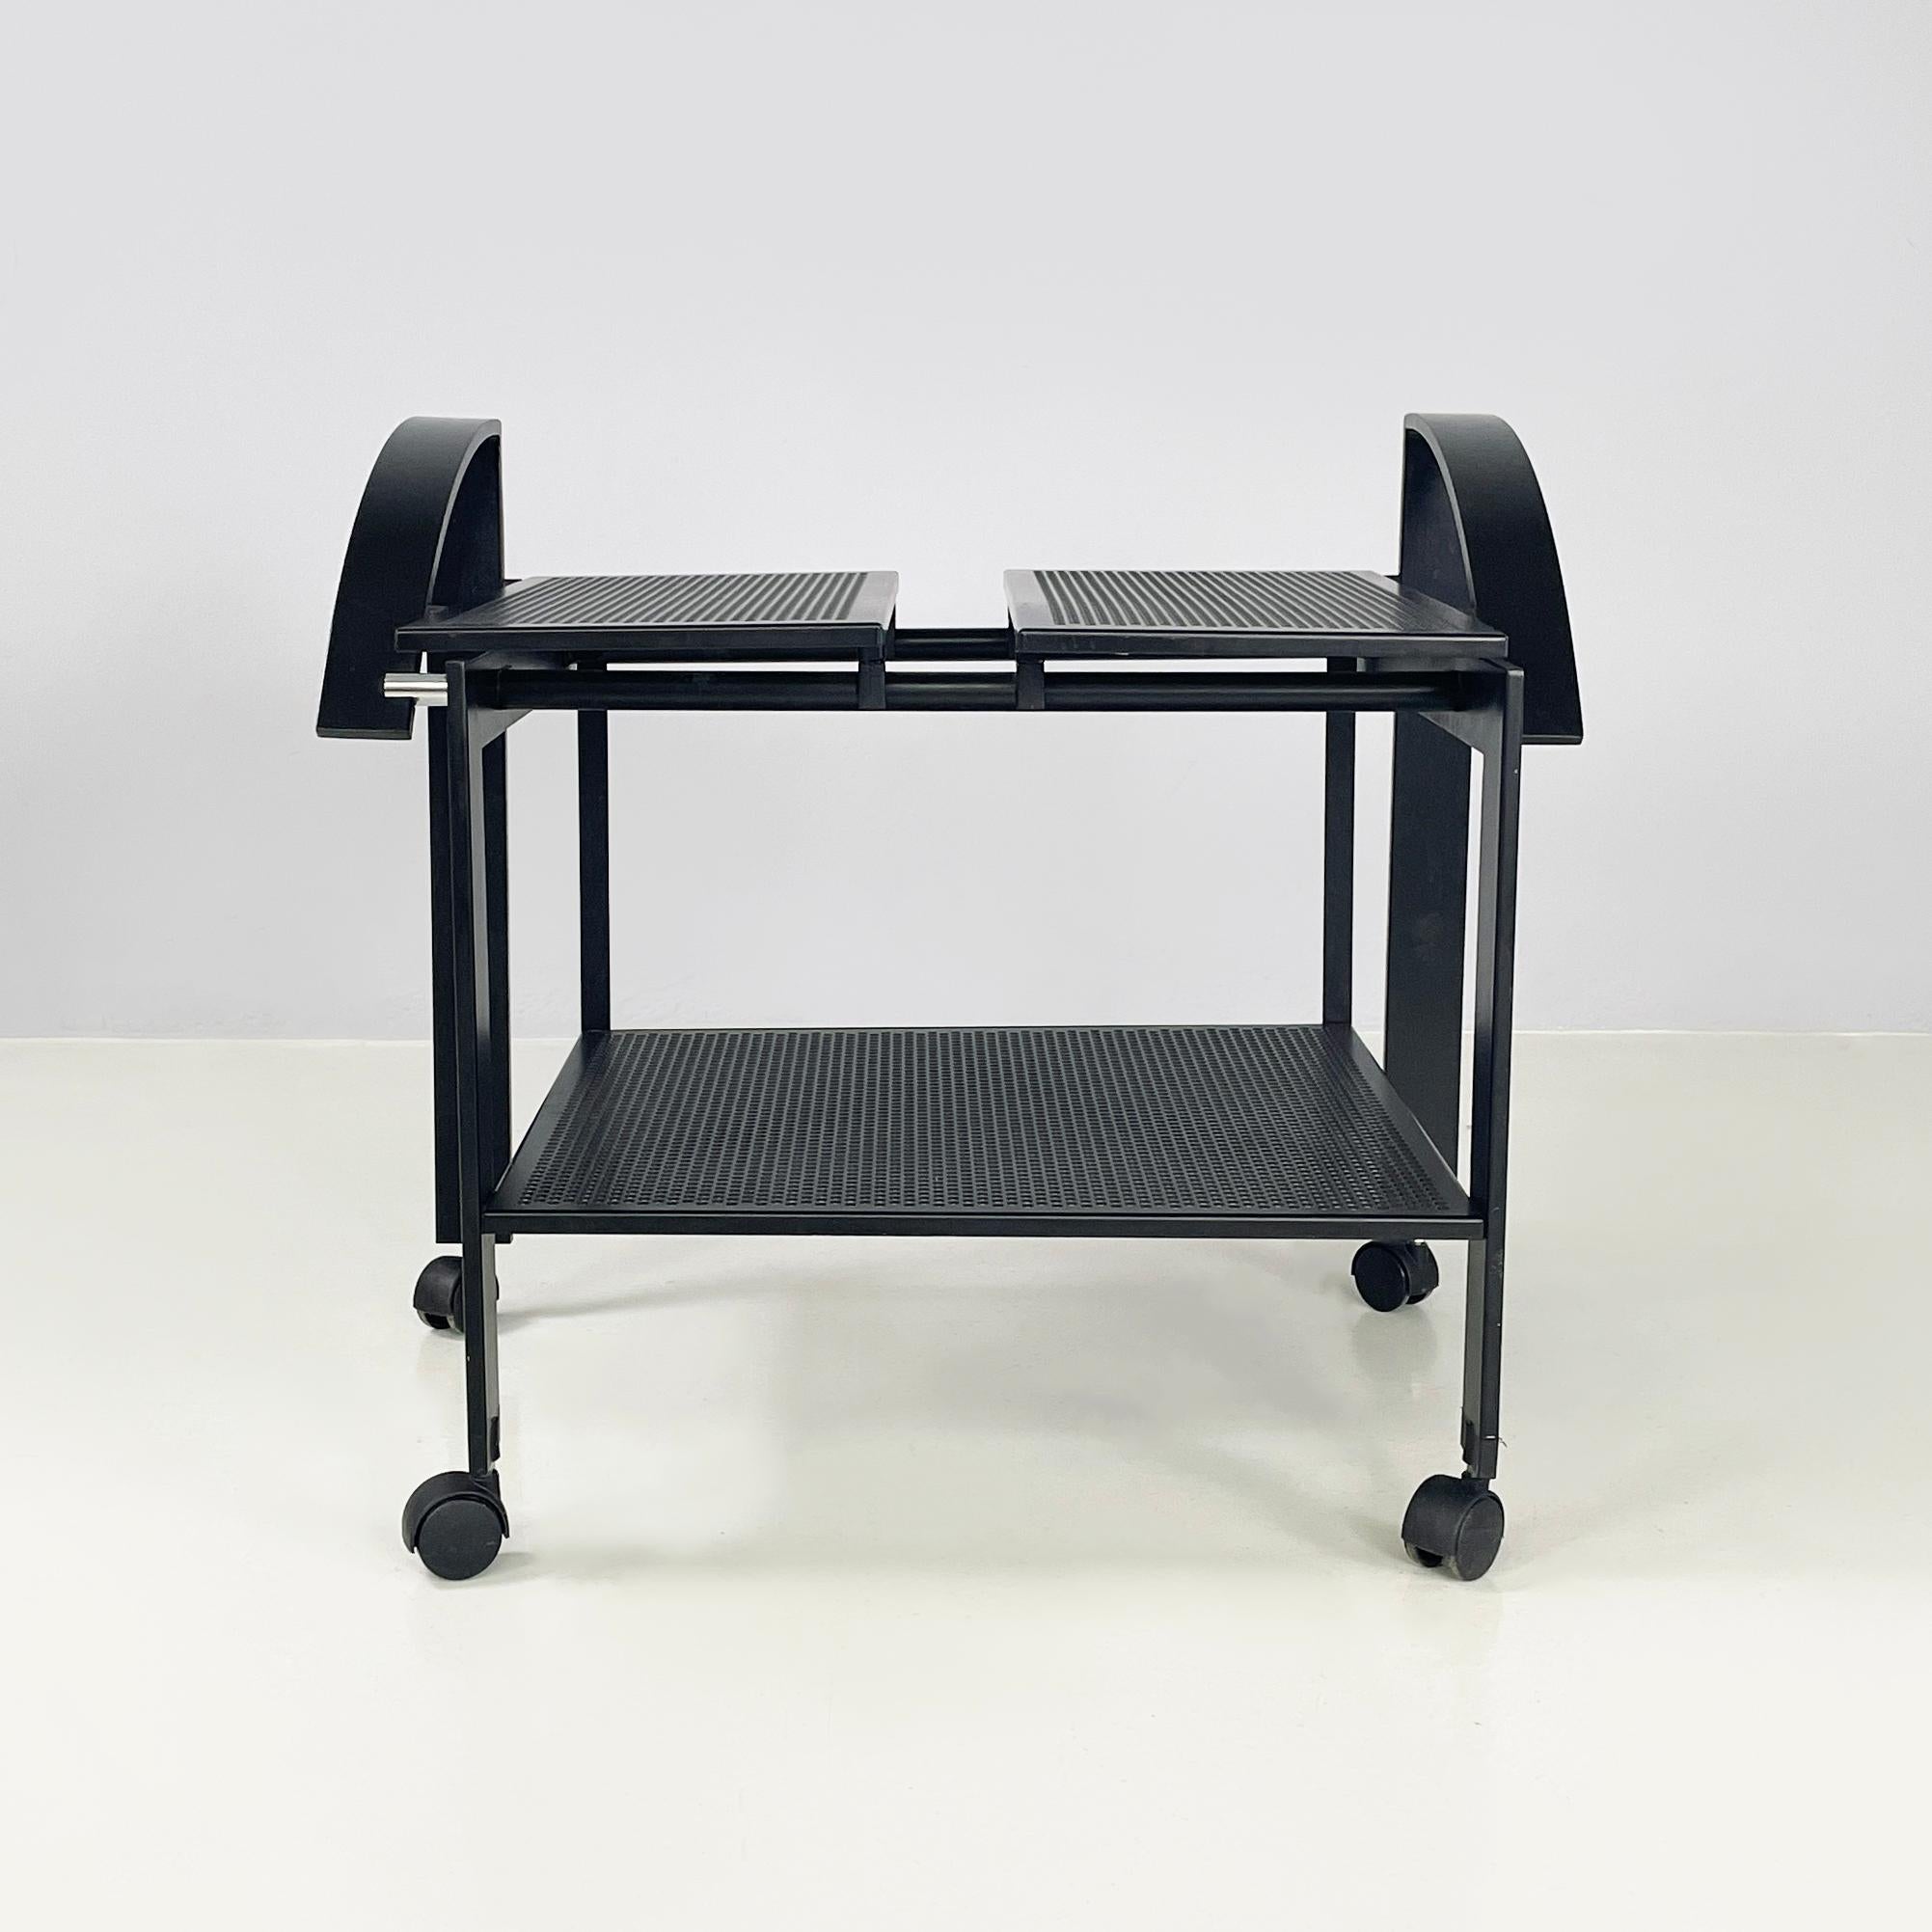 Italian modern Cart with 2 tops in black perforated metal, 1980s
Cart with double perforated rectangular shelf with round holes, entirely in black painted metal. The upper top is divided into two parts and is supported by a black metal tubular